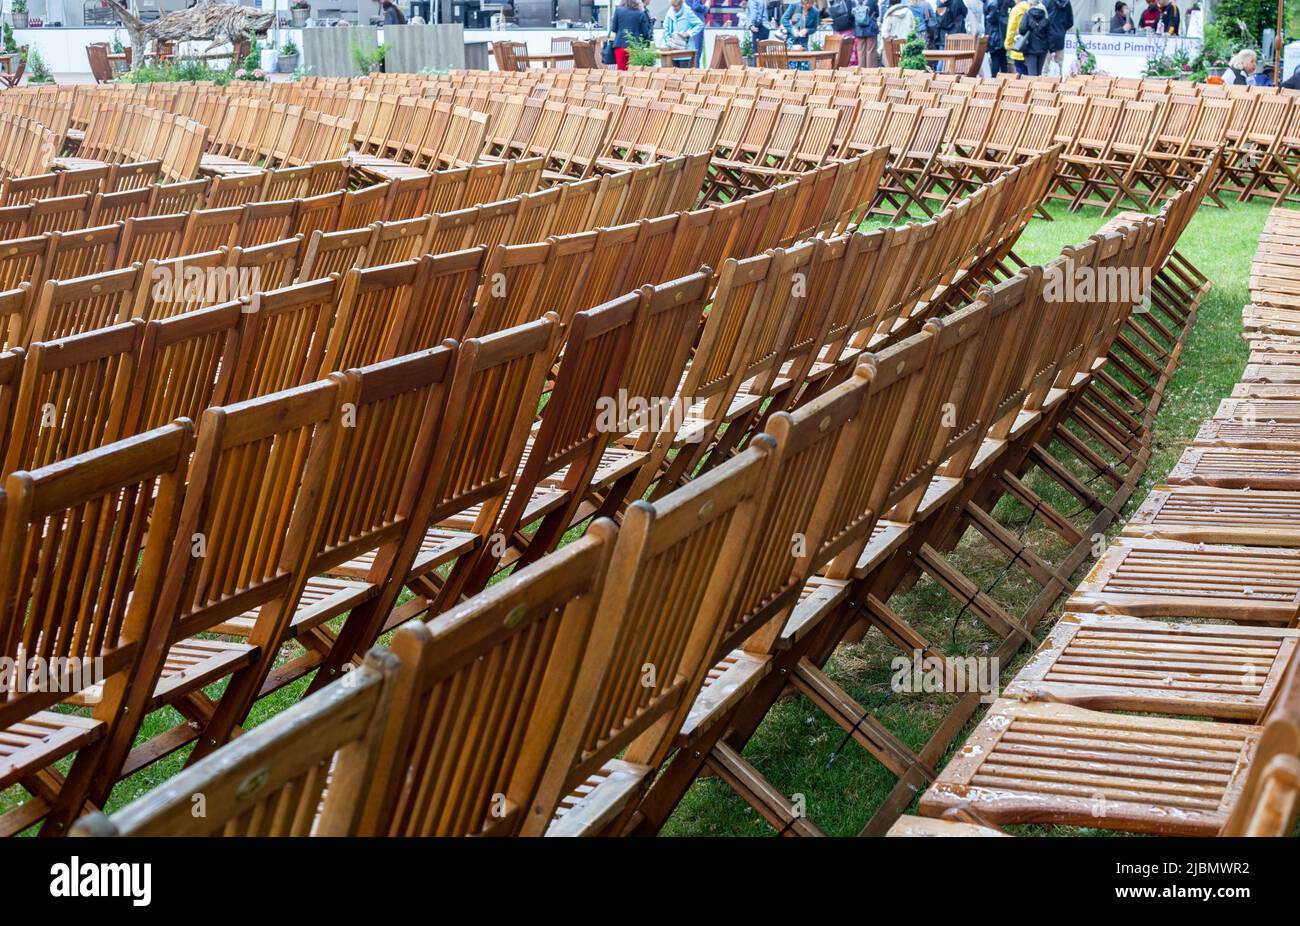 Chelsea, London, England, May 24th 2022, Many rows of wooden chairs with crowds seen in the background. Stock Photo